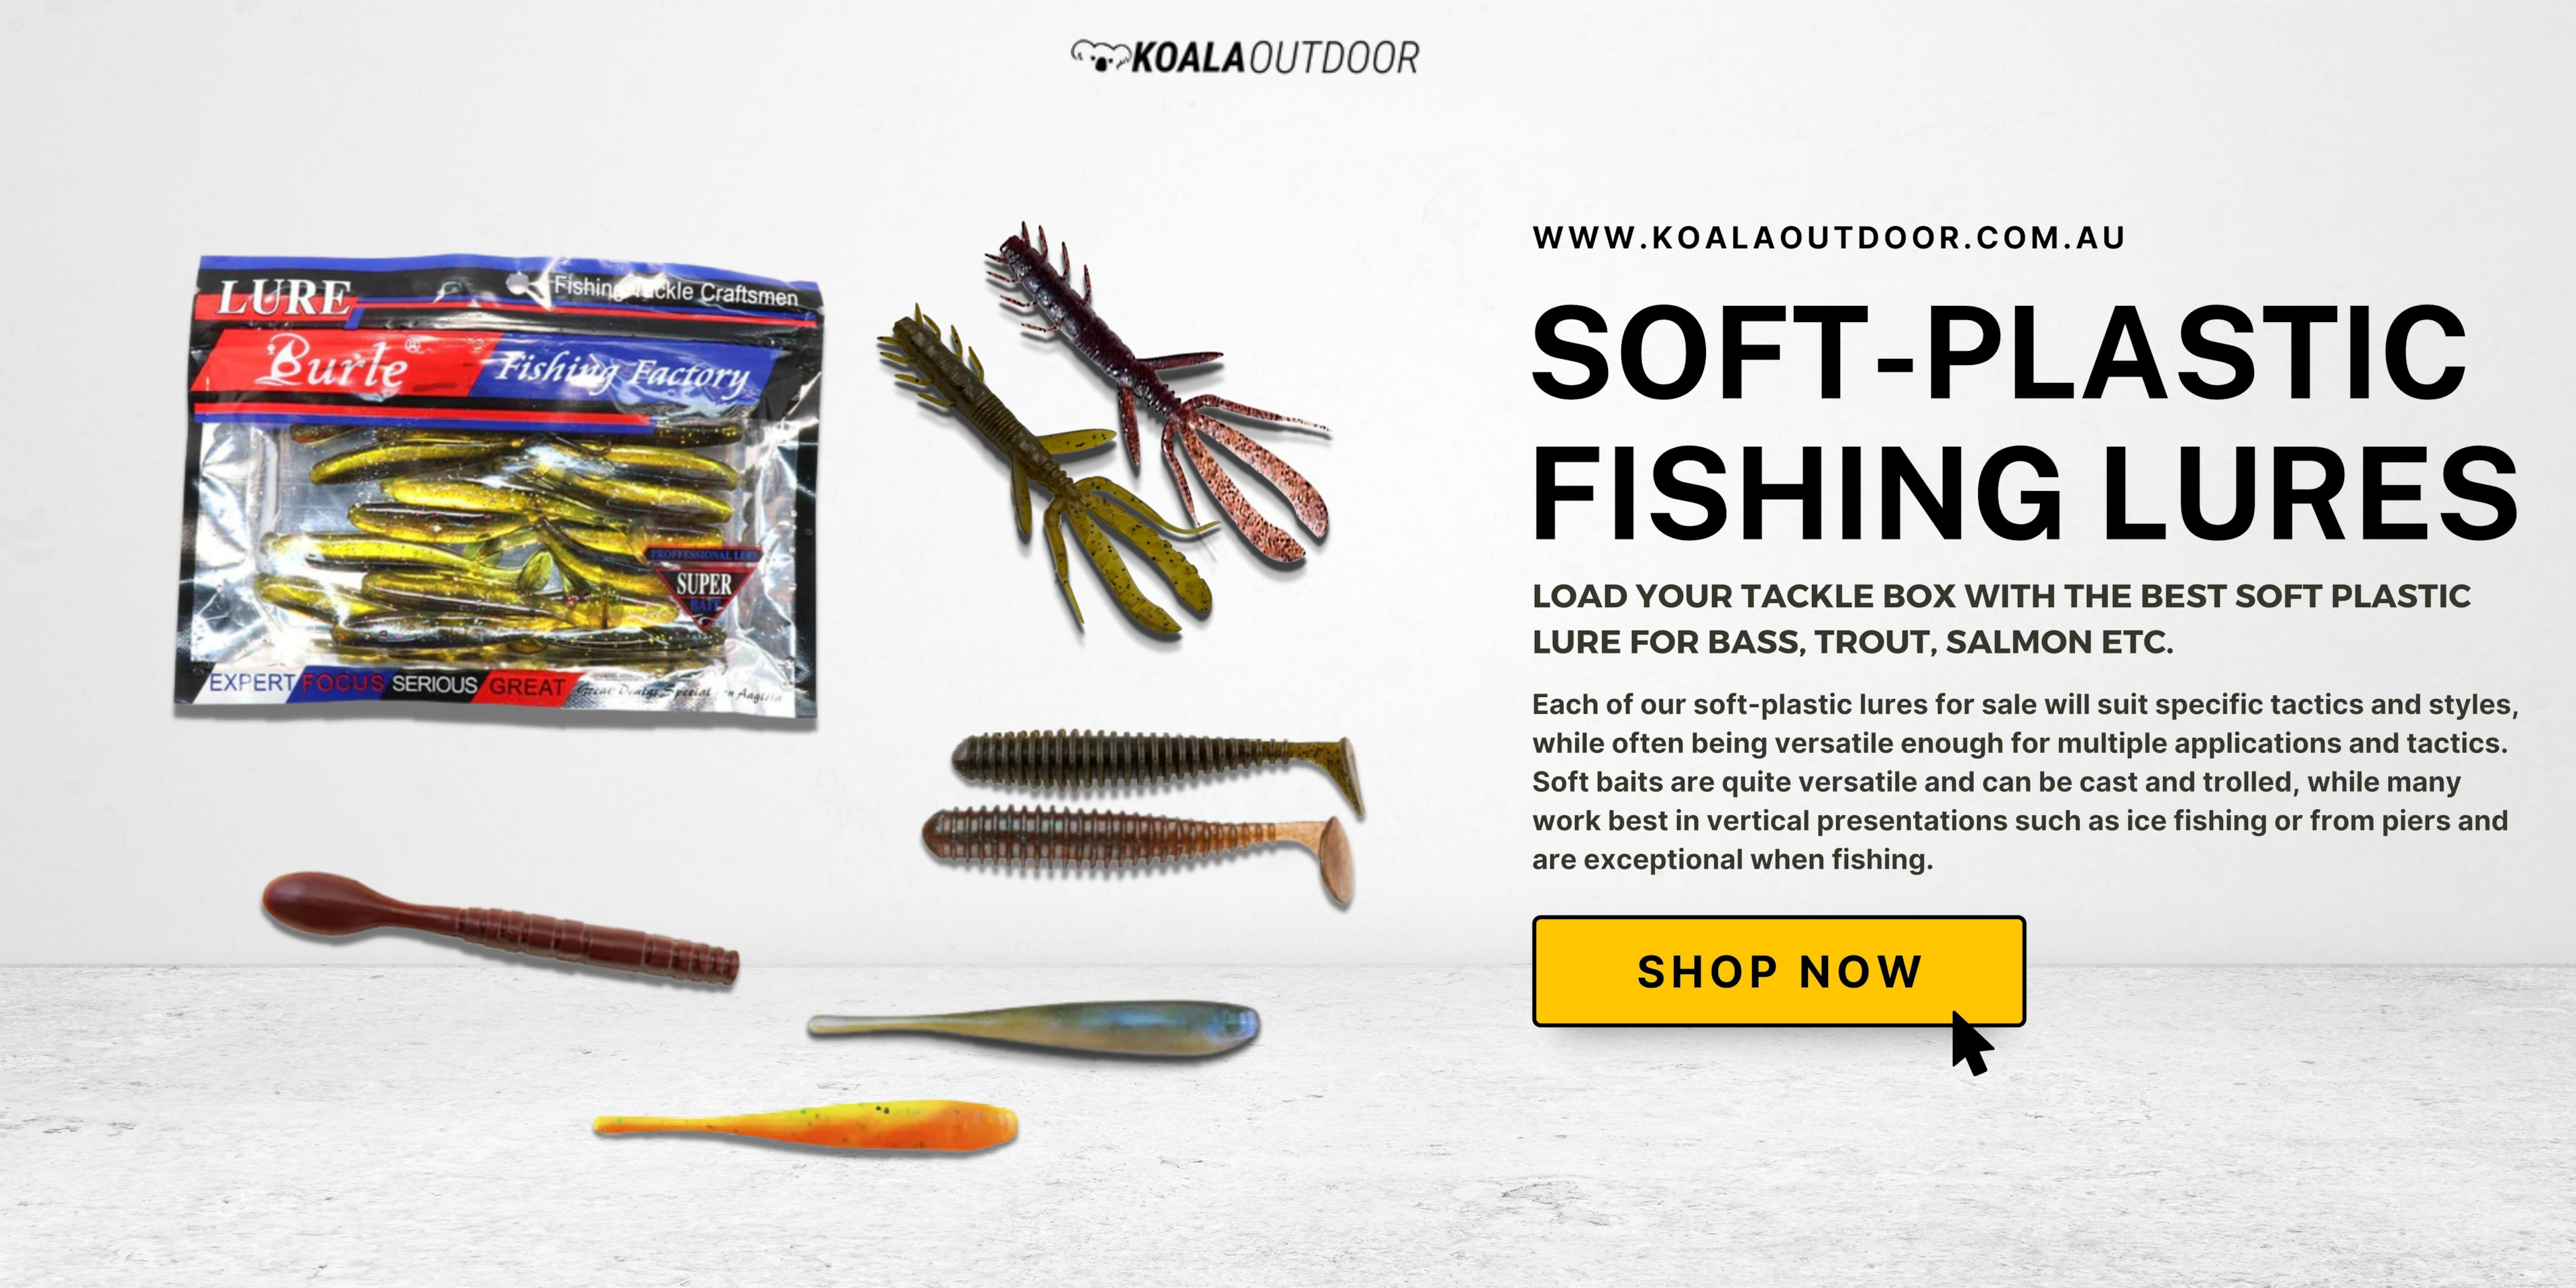 Your Guide to Catching Bass - Best Bass Lures